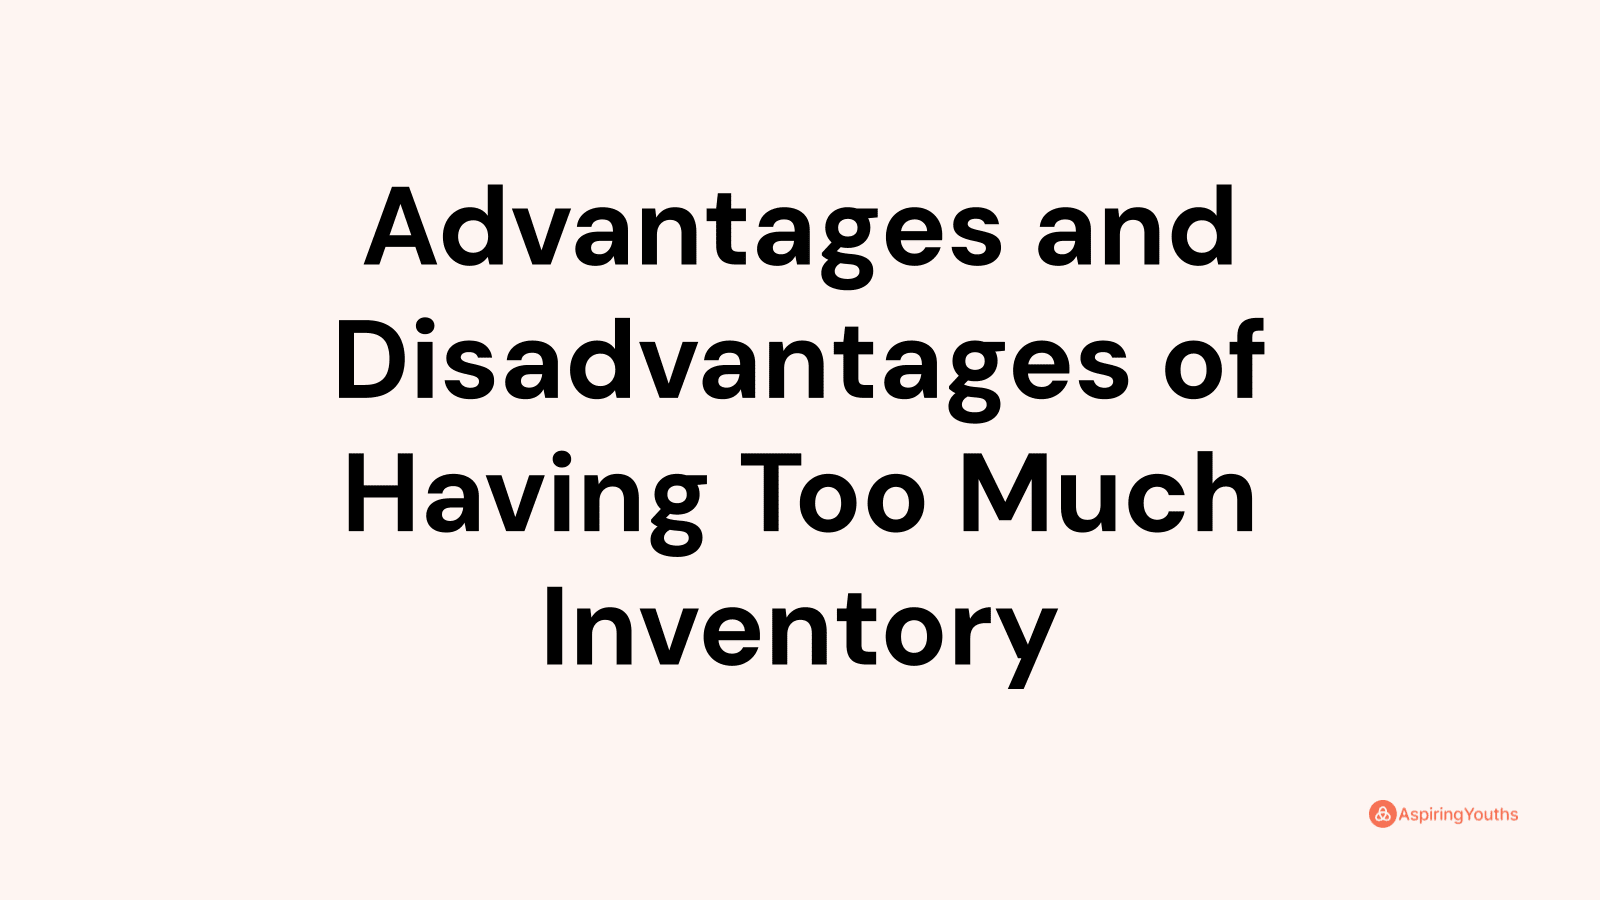 Advantages and disadvantages of Having Too Much Inventory